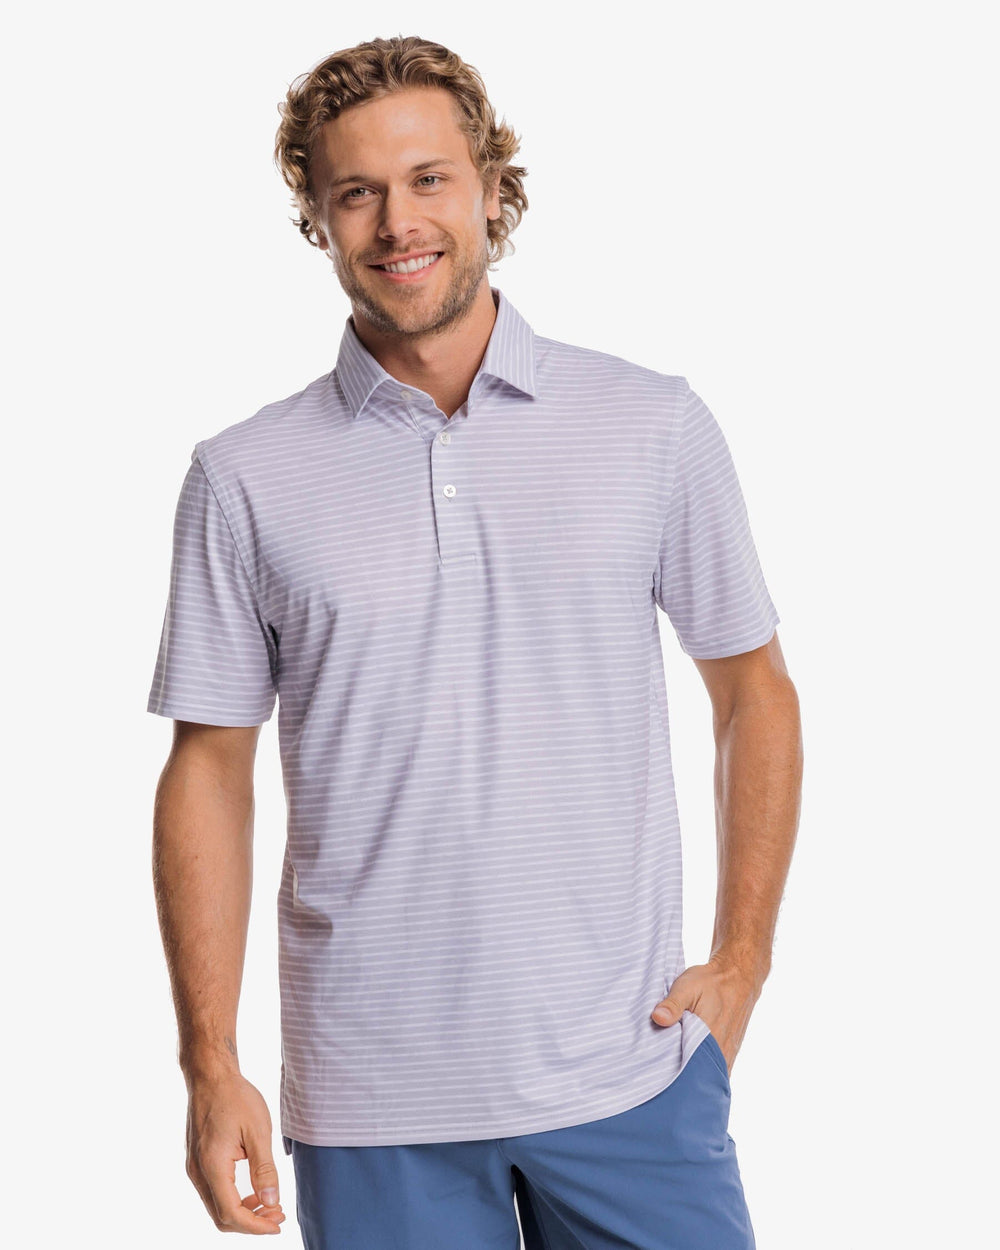 The front view of the Southern Tide Driver Wymberly Stripe Performance Polo Shirt by Southern Tide - Slate Grey